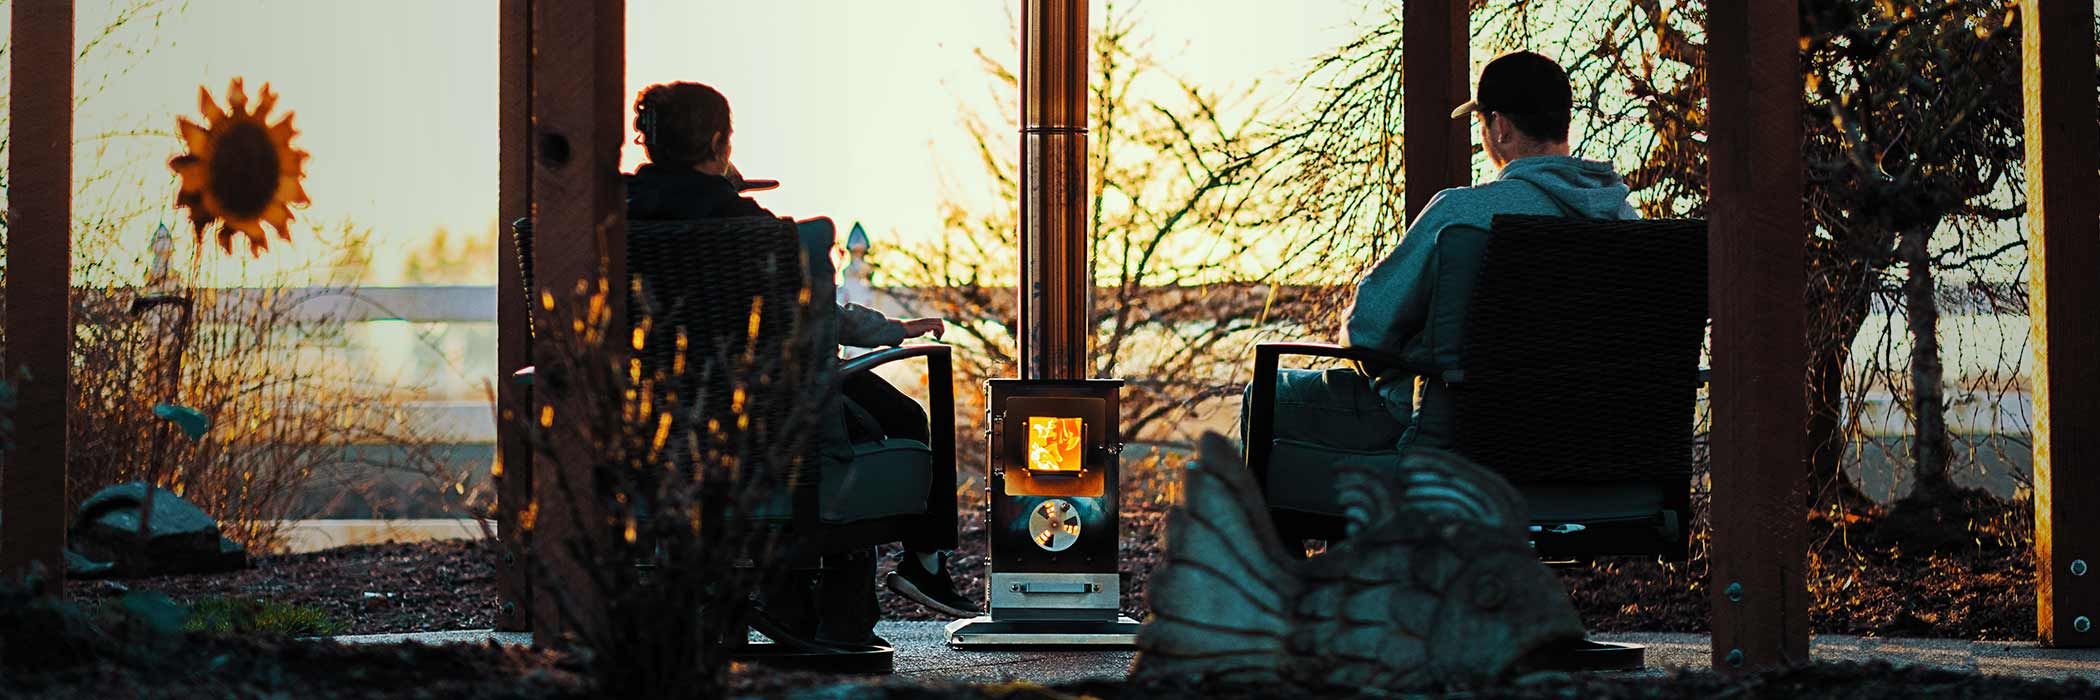 Lil’ Timber Patio Heater in Outdoor Setting